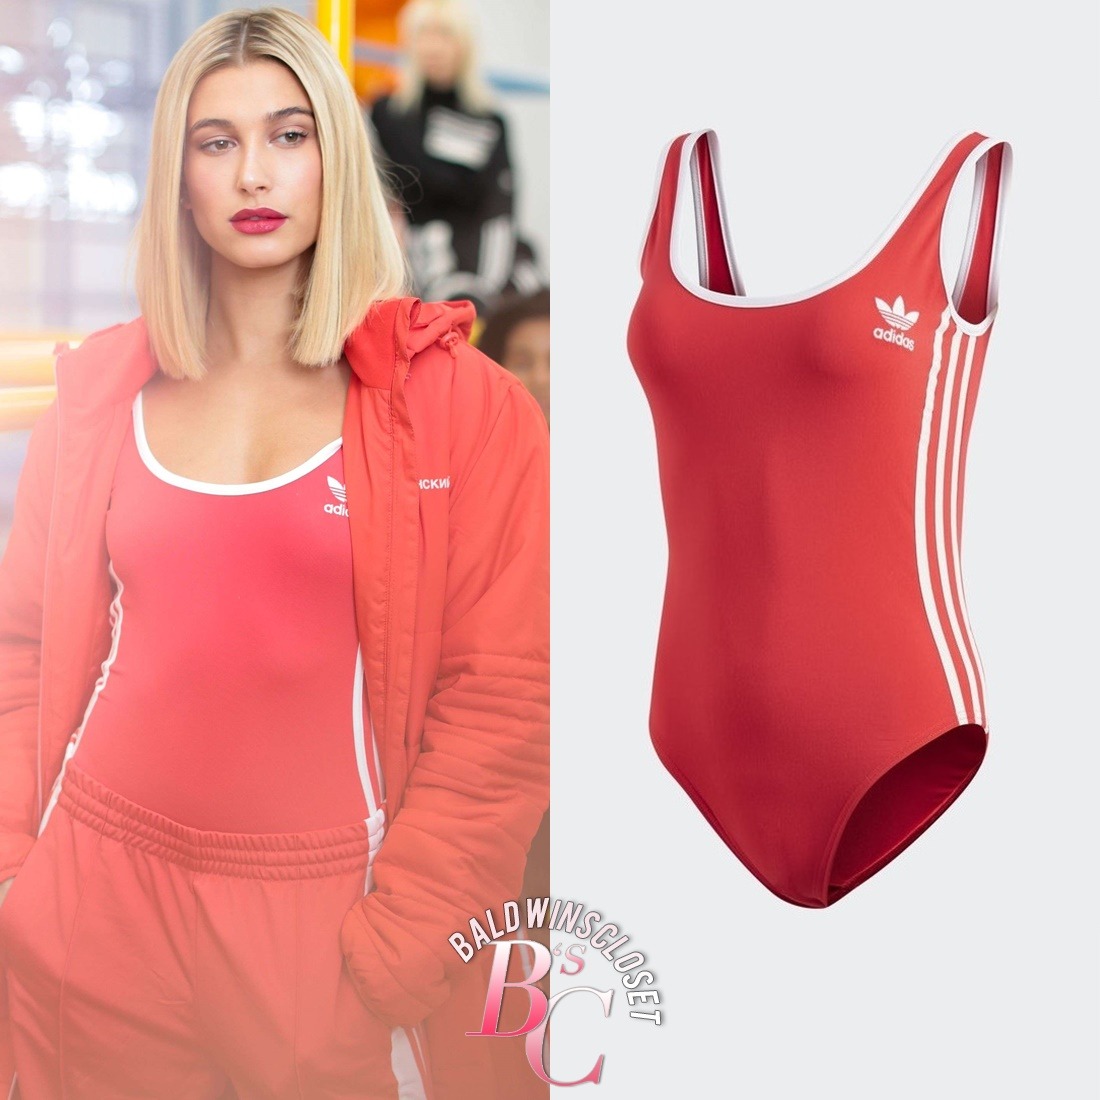 adidas bodysuit outfit